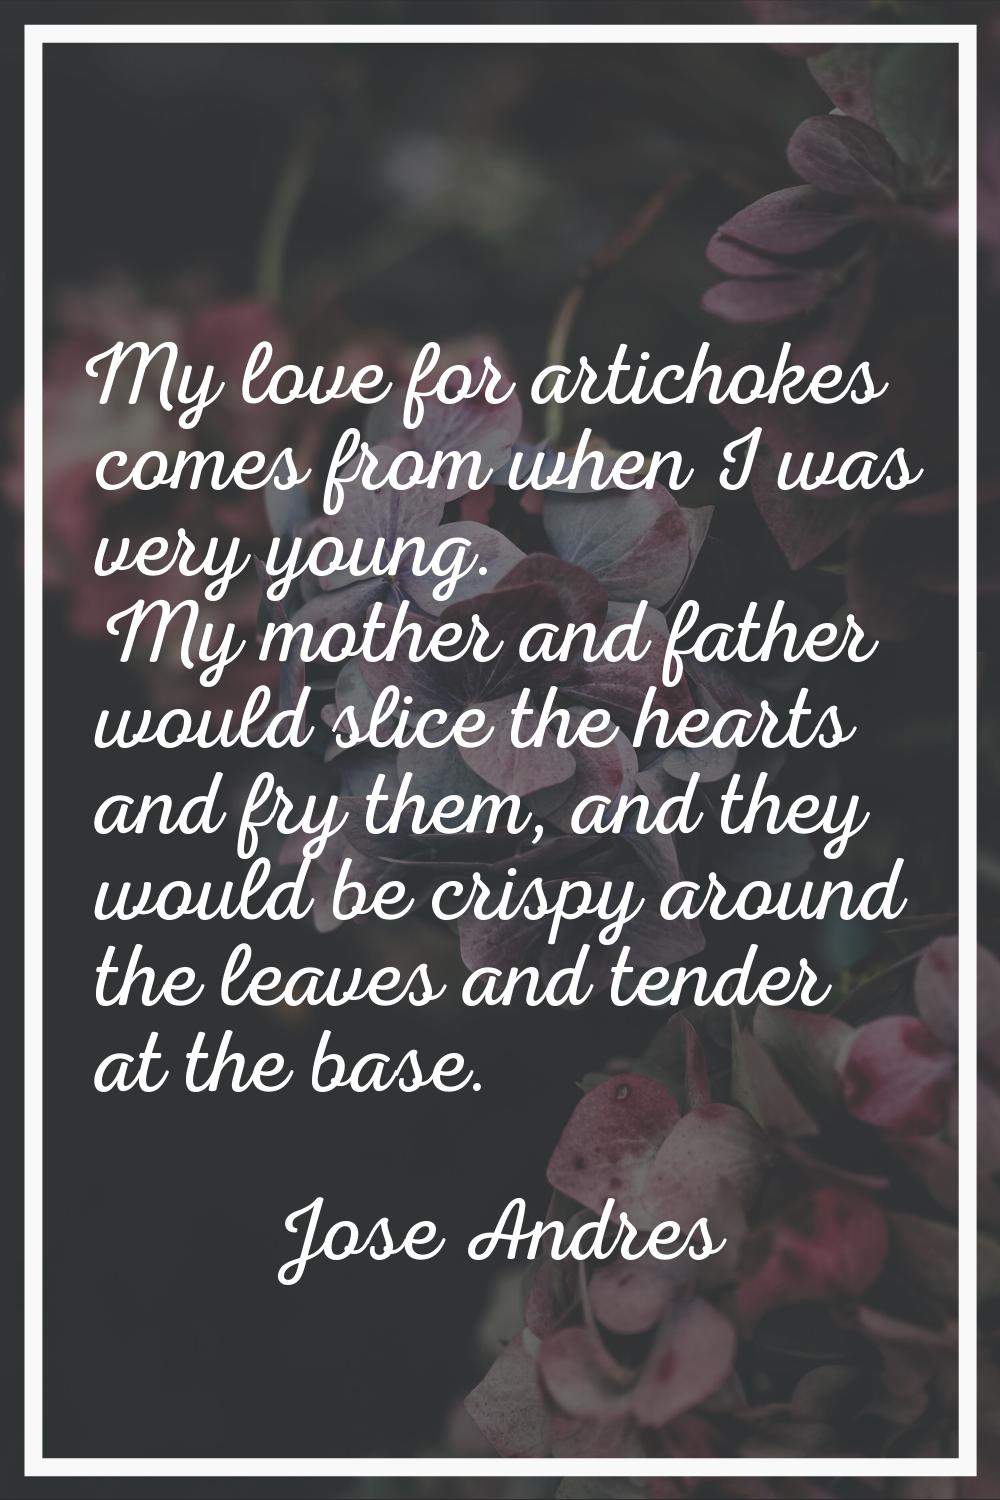 My love for artichokes comes from when I was very young. My mother and father would slice the heart